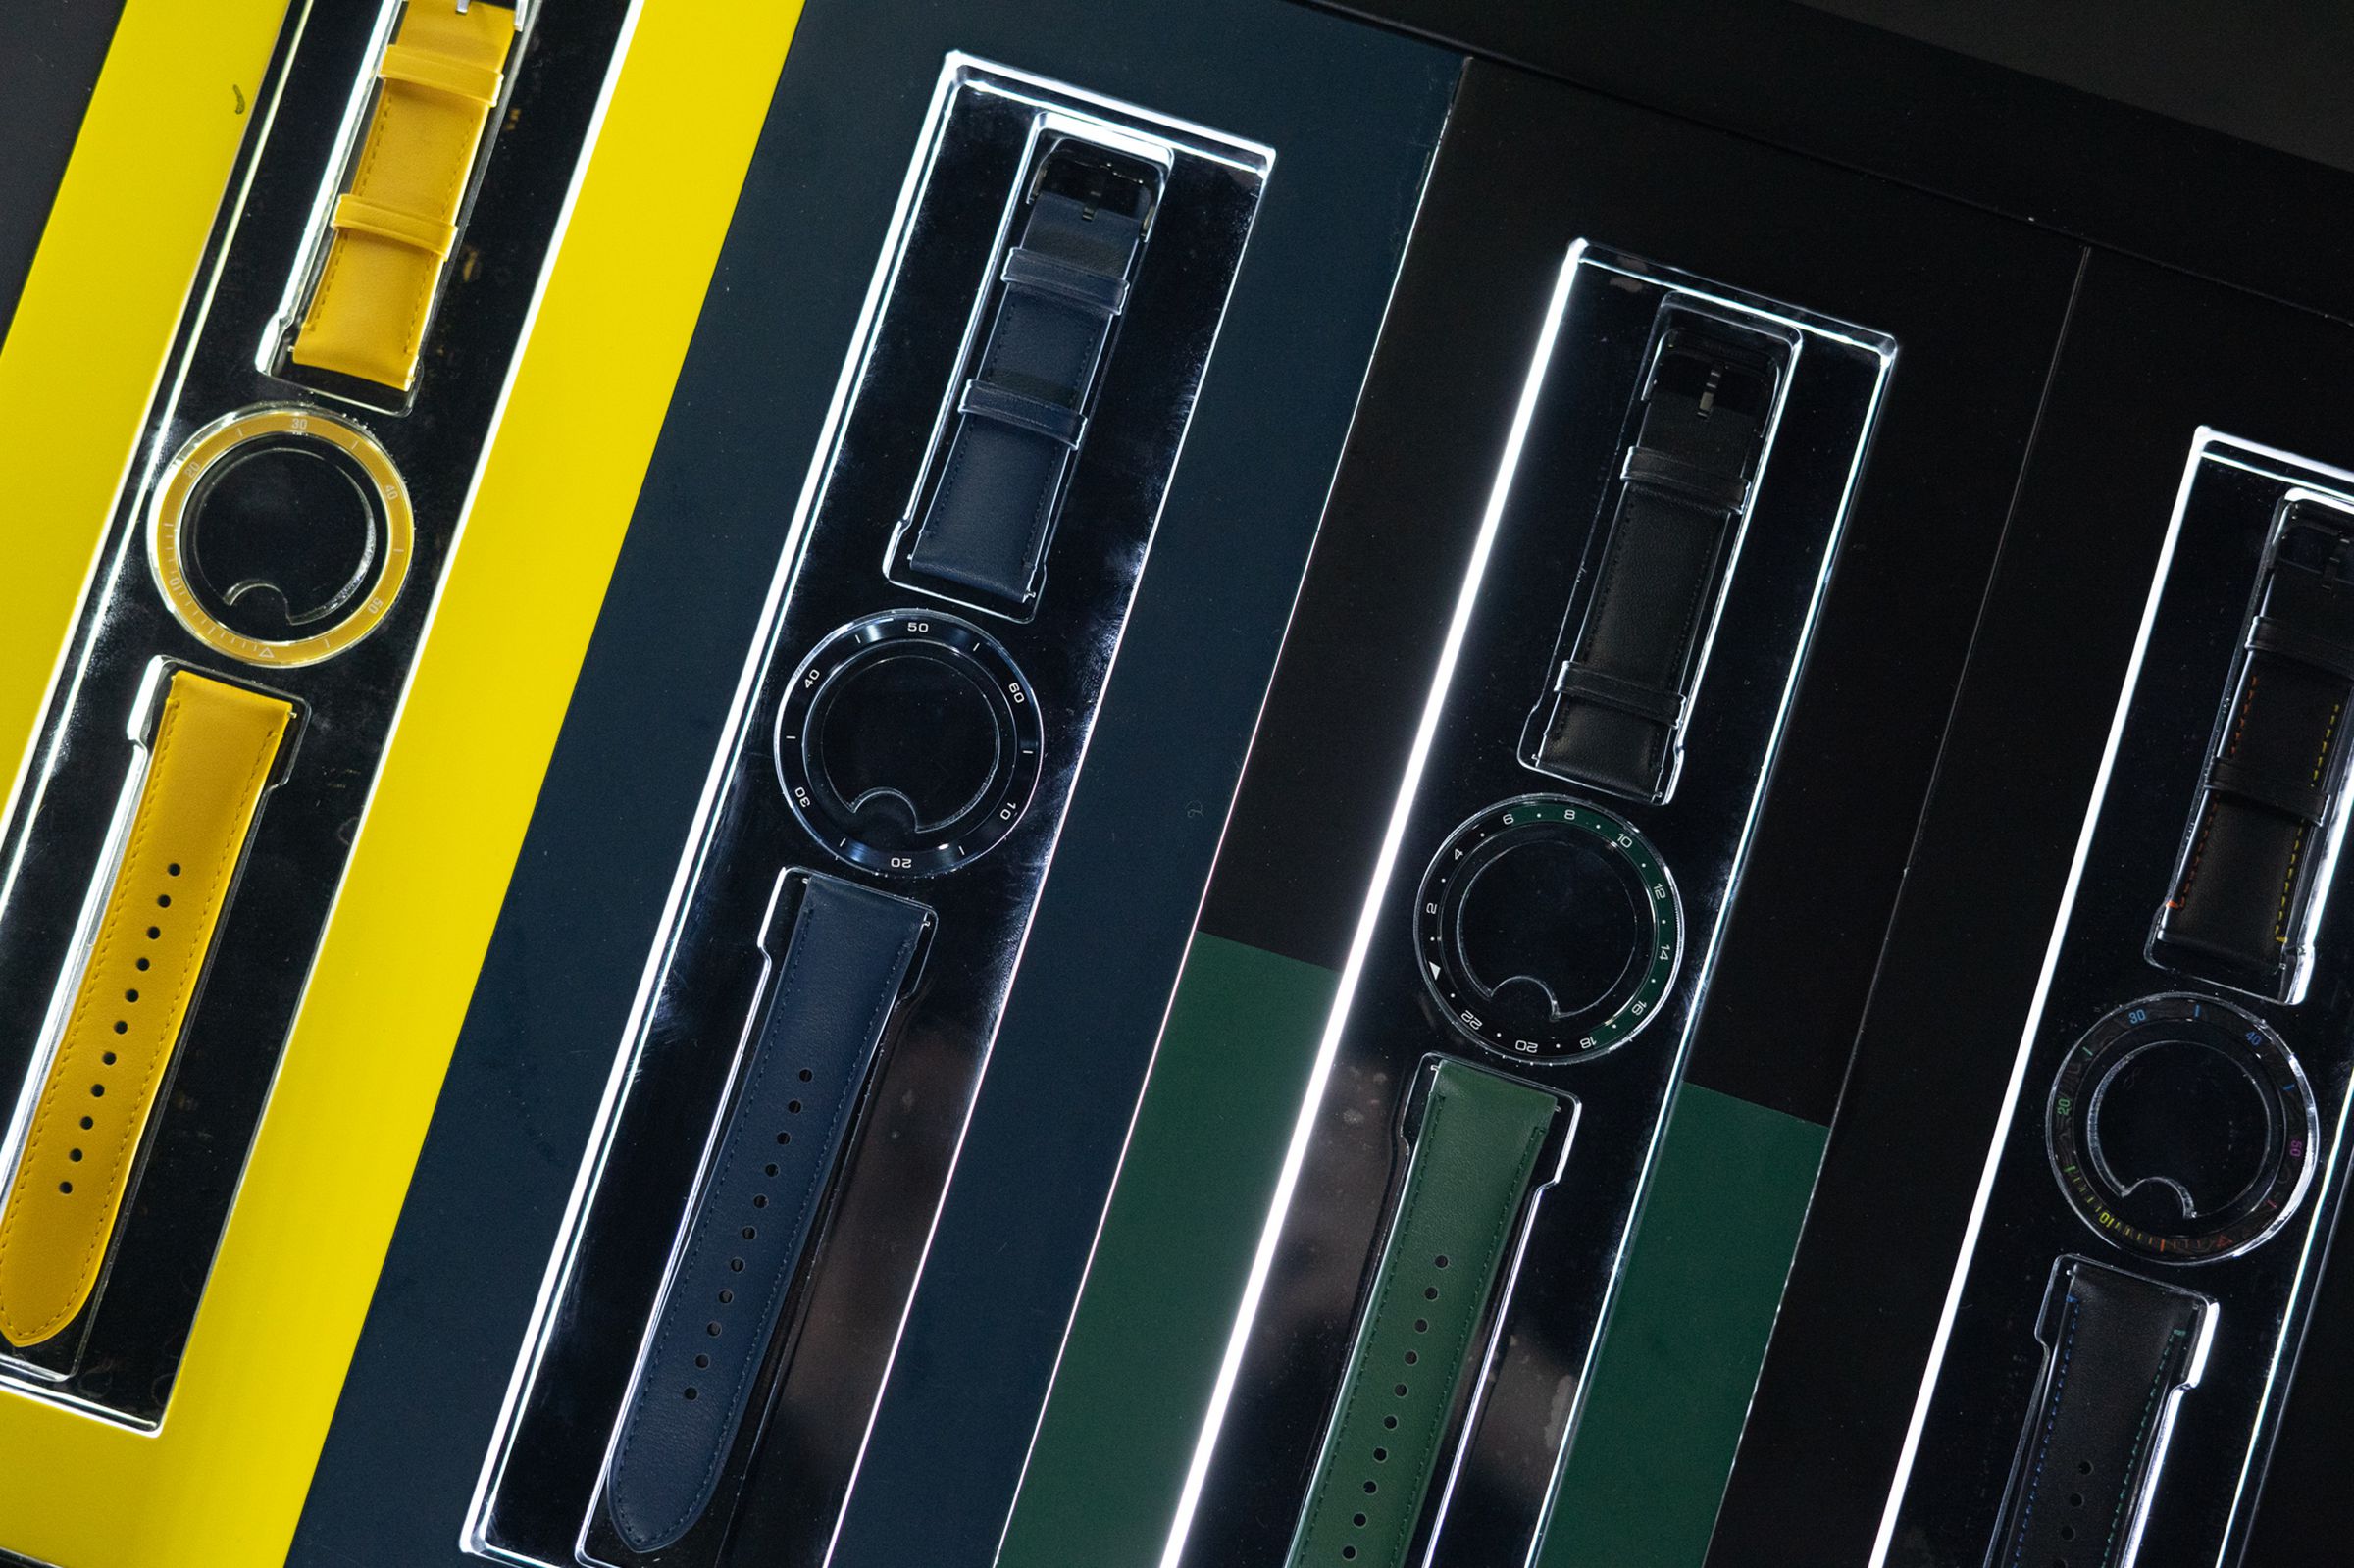 Xiaomi S3 straps and bezels in yellow, blue, green, and black.